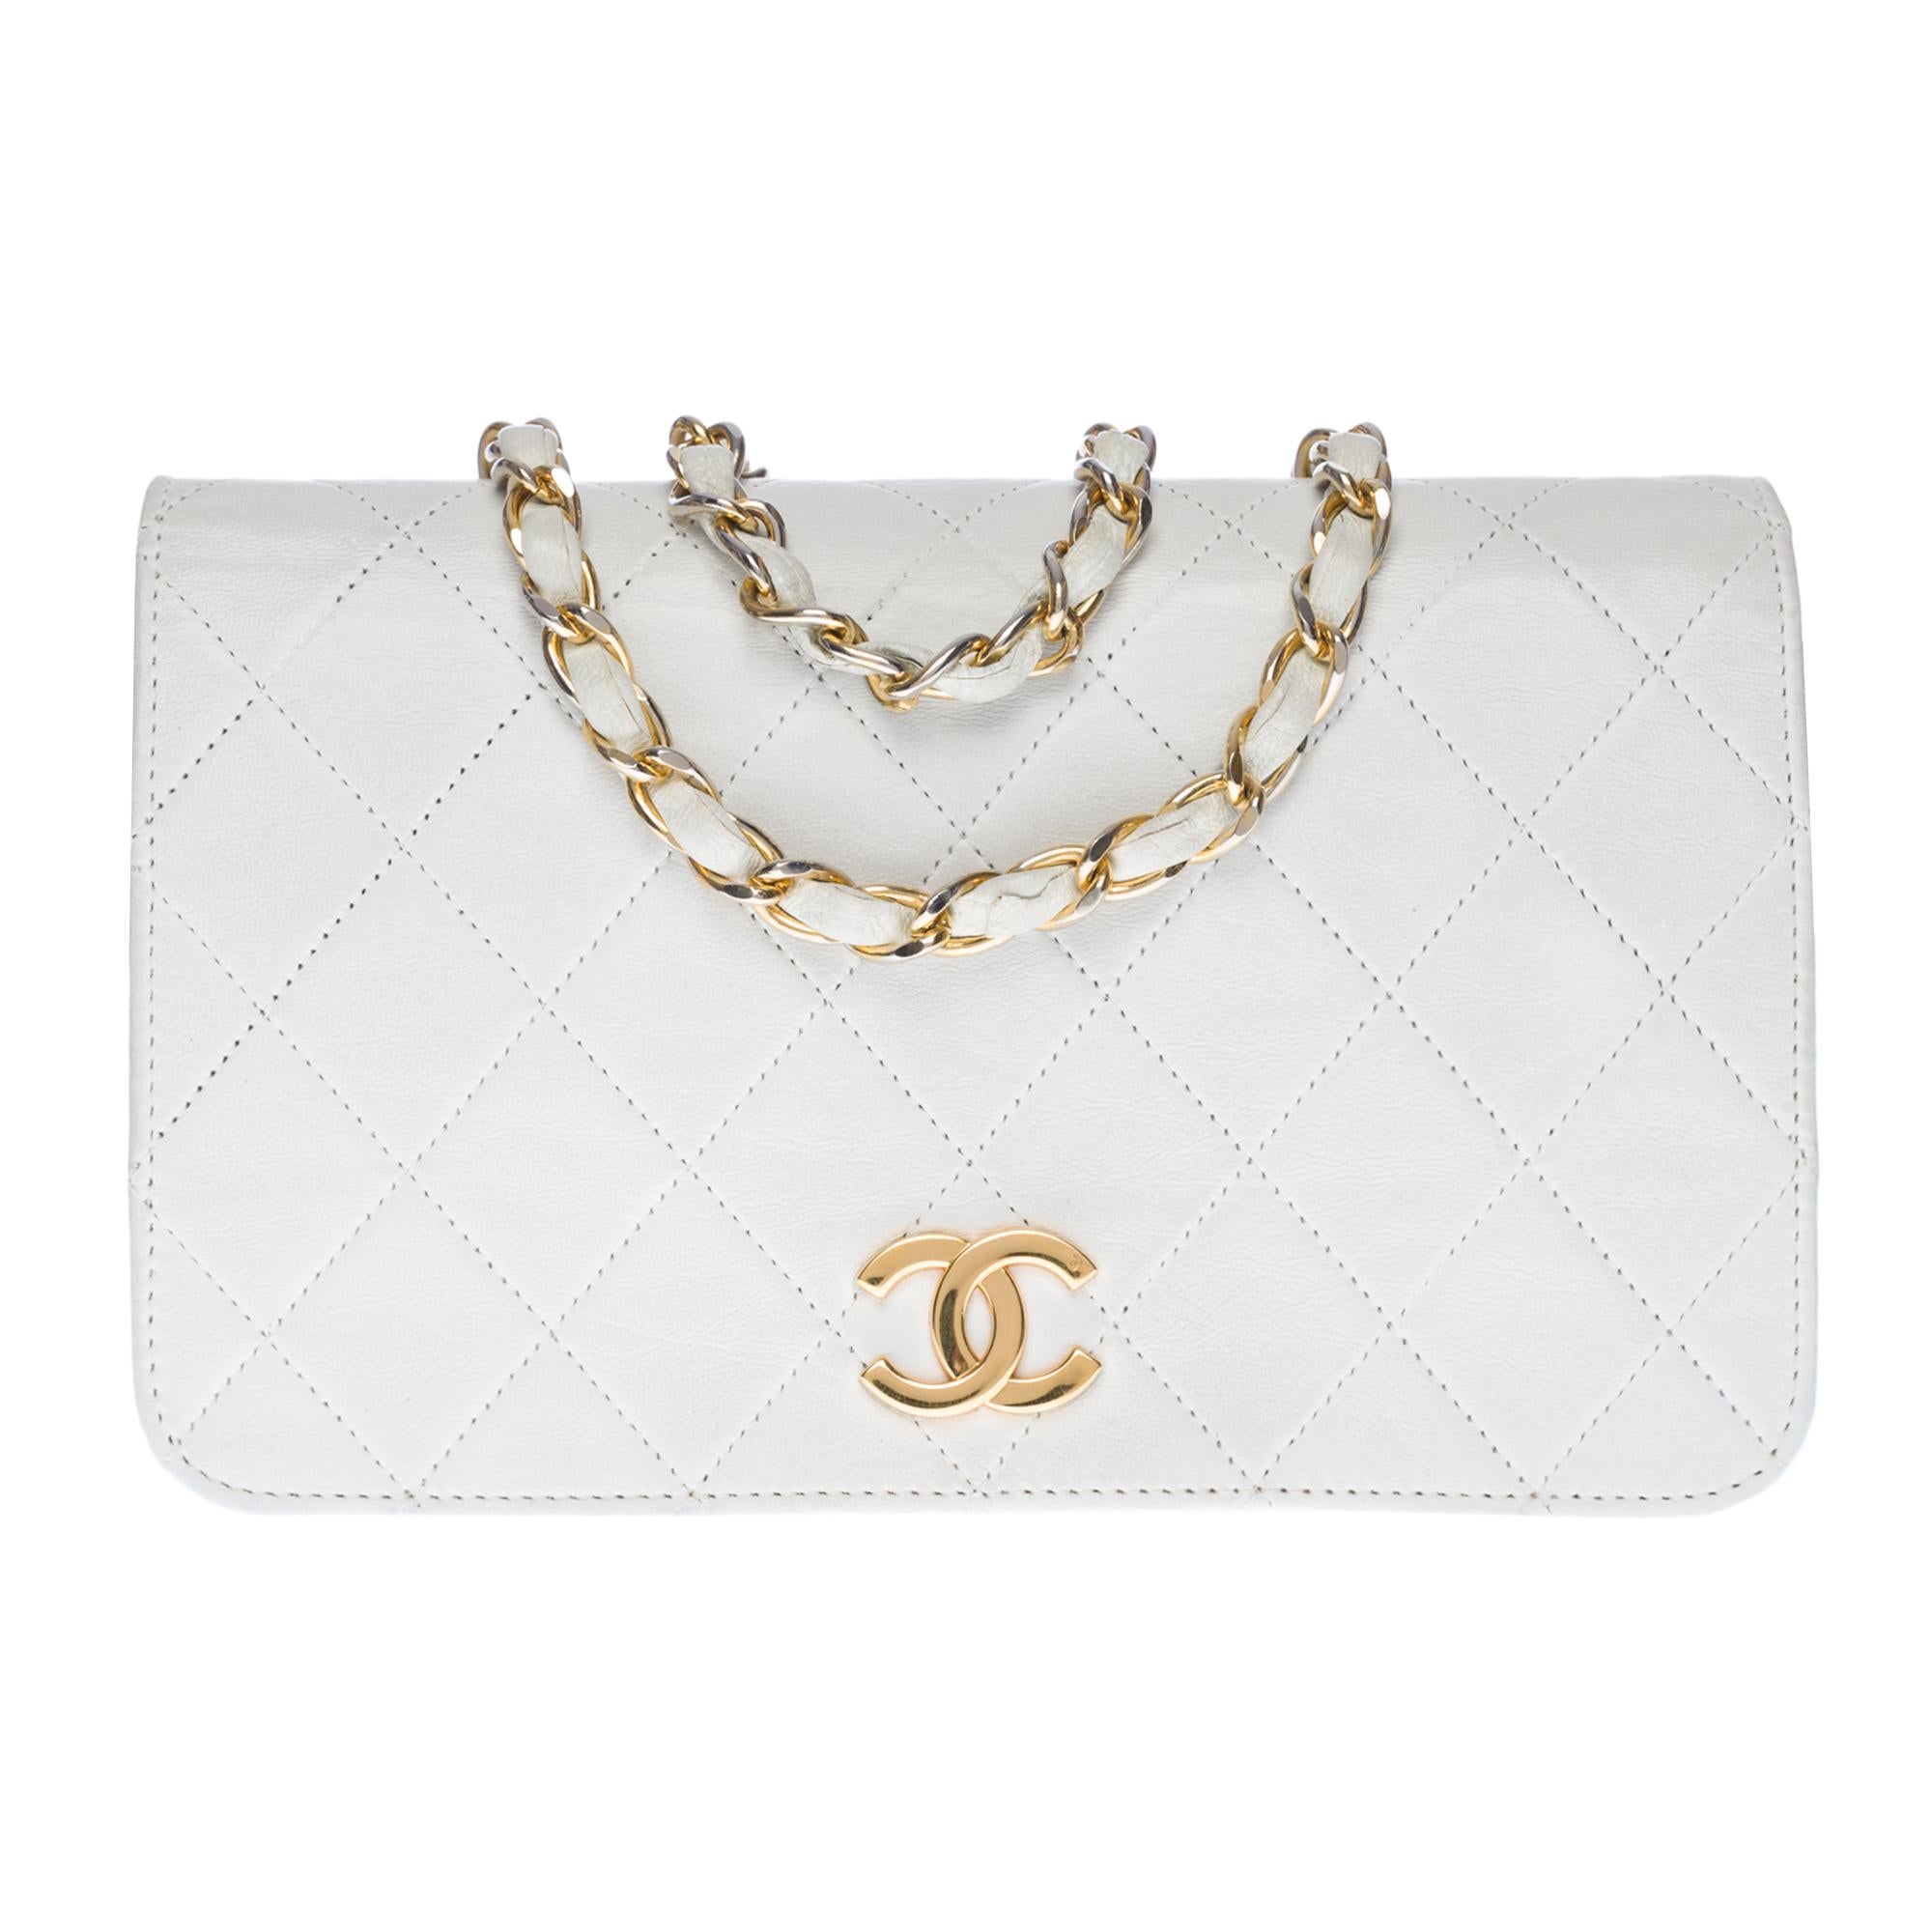 Chanel Full flap Mini shoulder bag in white quilted lambskin, GHW 5